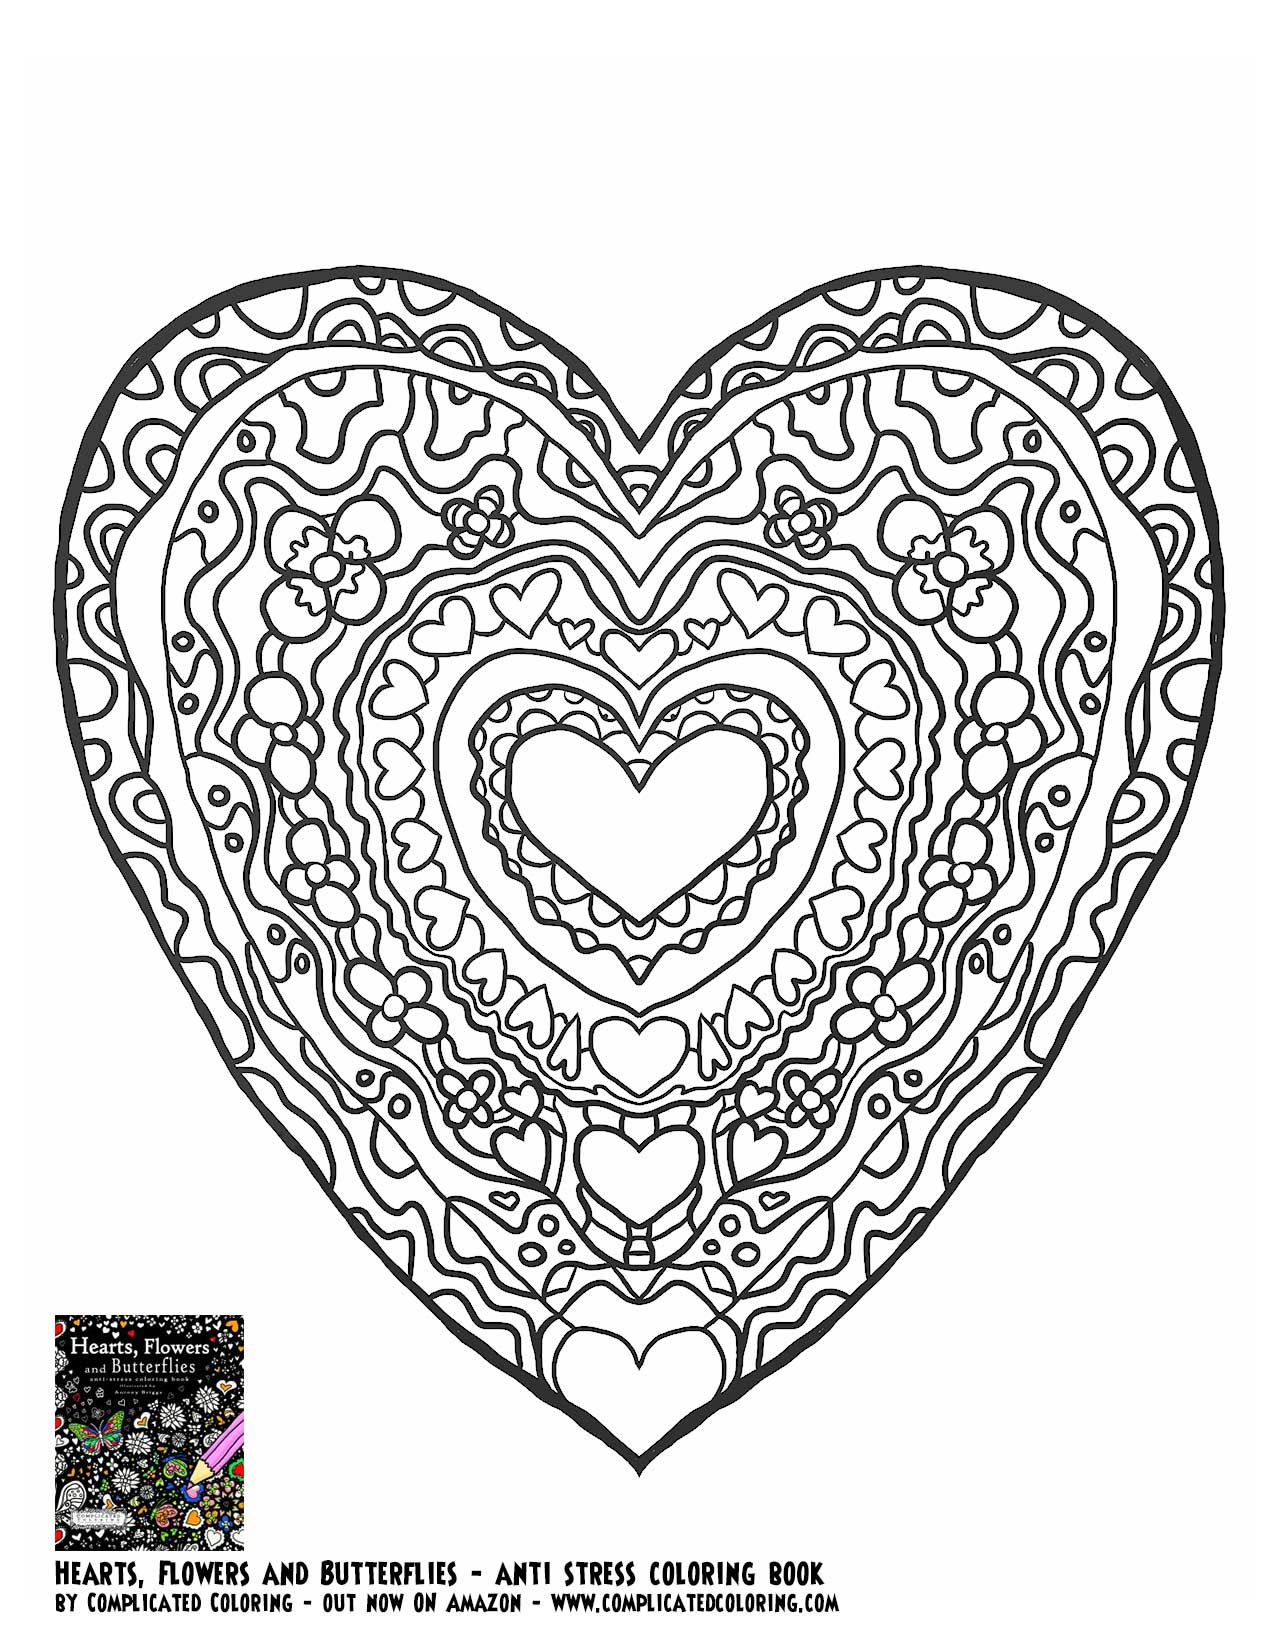 Butterfly Heart Coloring Pages For Adults - Coloring Pages For All ...